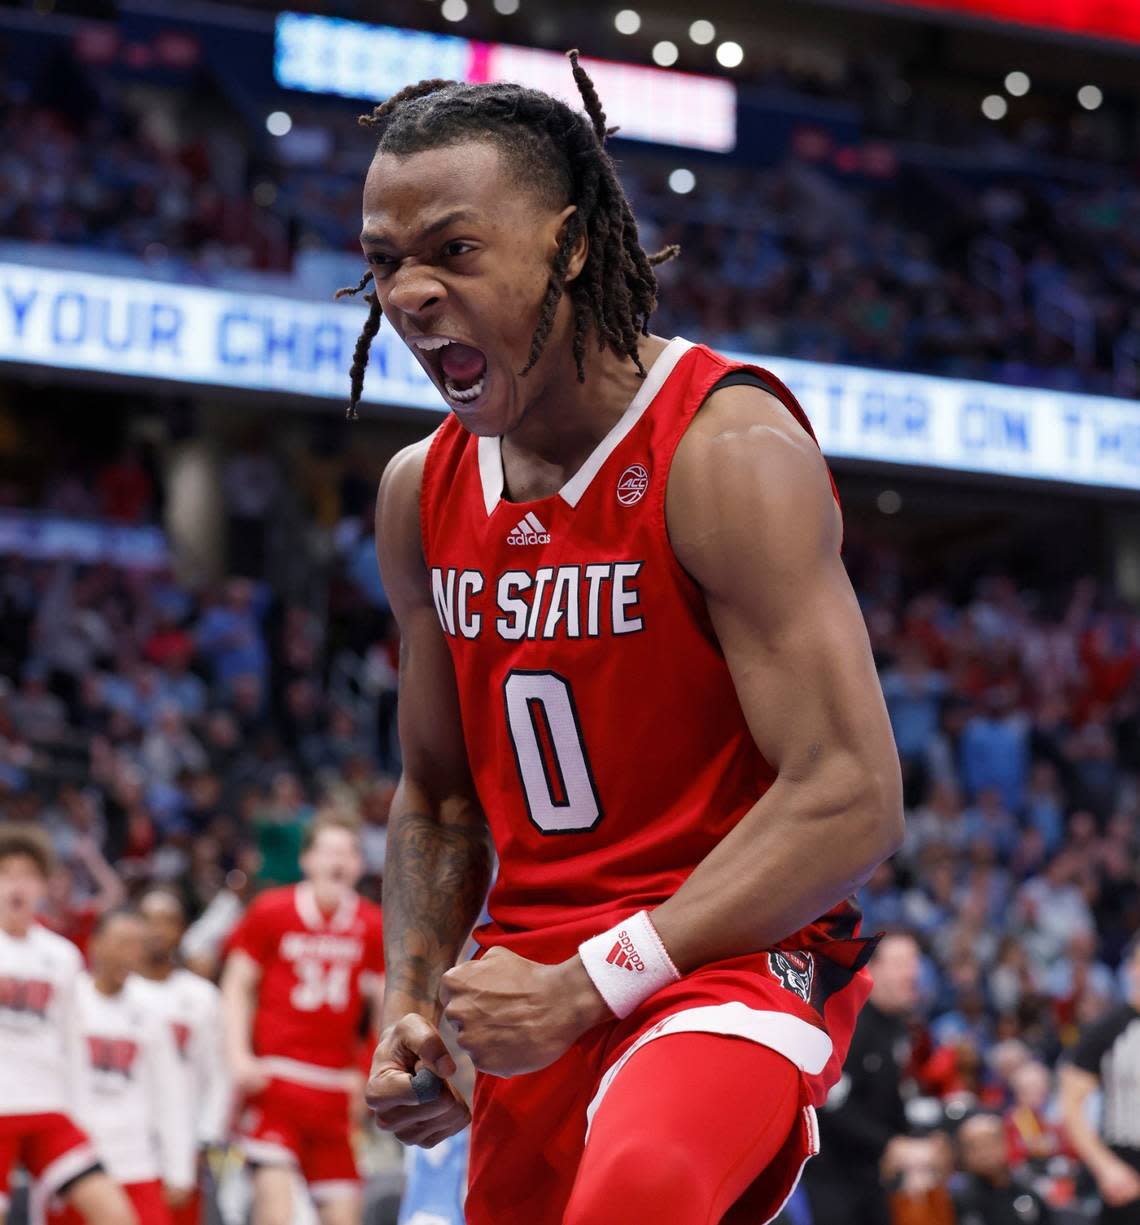 N.C. State’s DJ Horne (0) celebrates after making the basket while being fouled during the second half N.C. State’s 84-76 victory over UNC in the championship game of the 2024 ACC Men’s Basketball Tournament at Capital One Arena in Washington, D.C., Saturday, March 16, 2024.